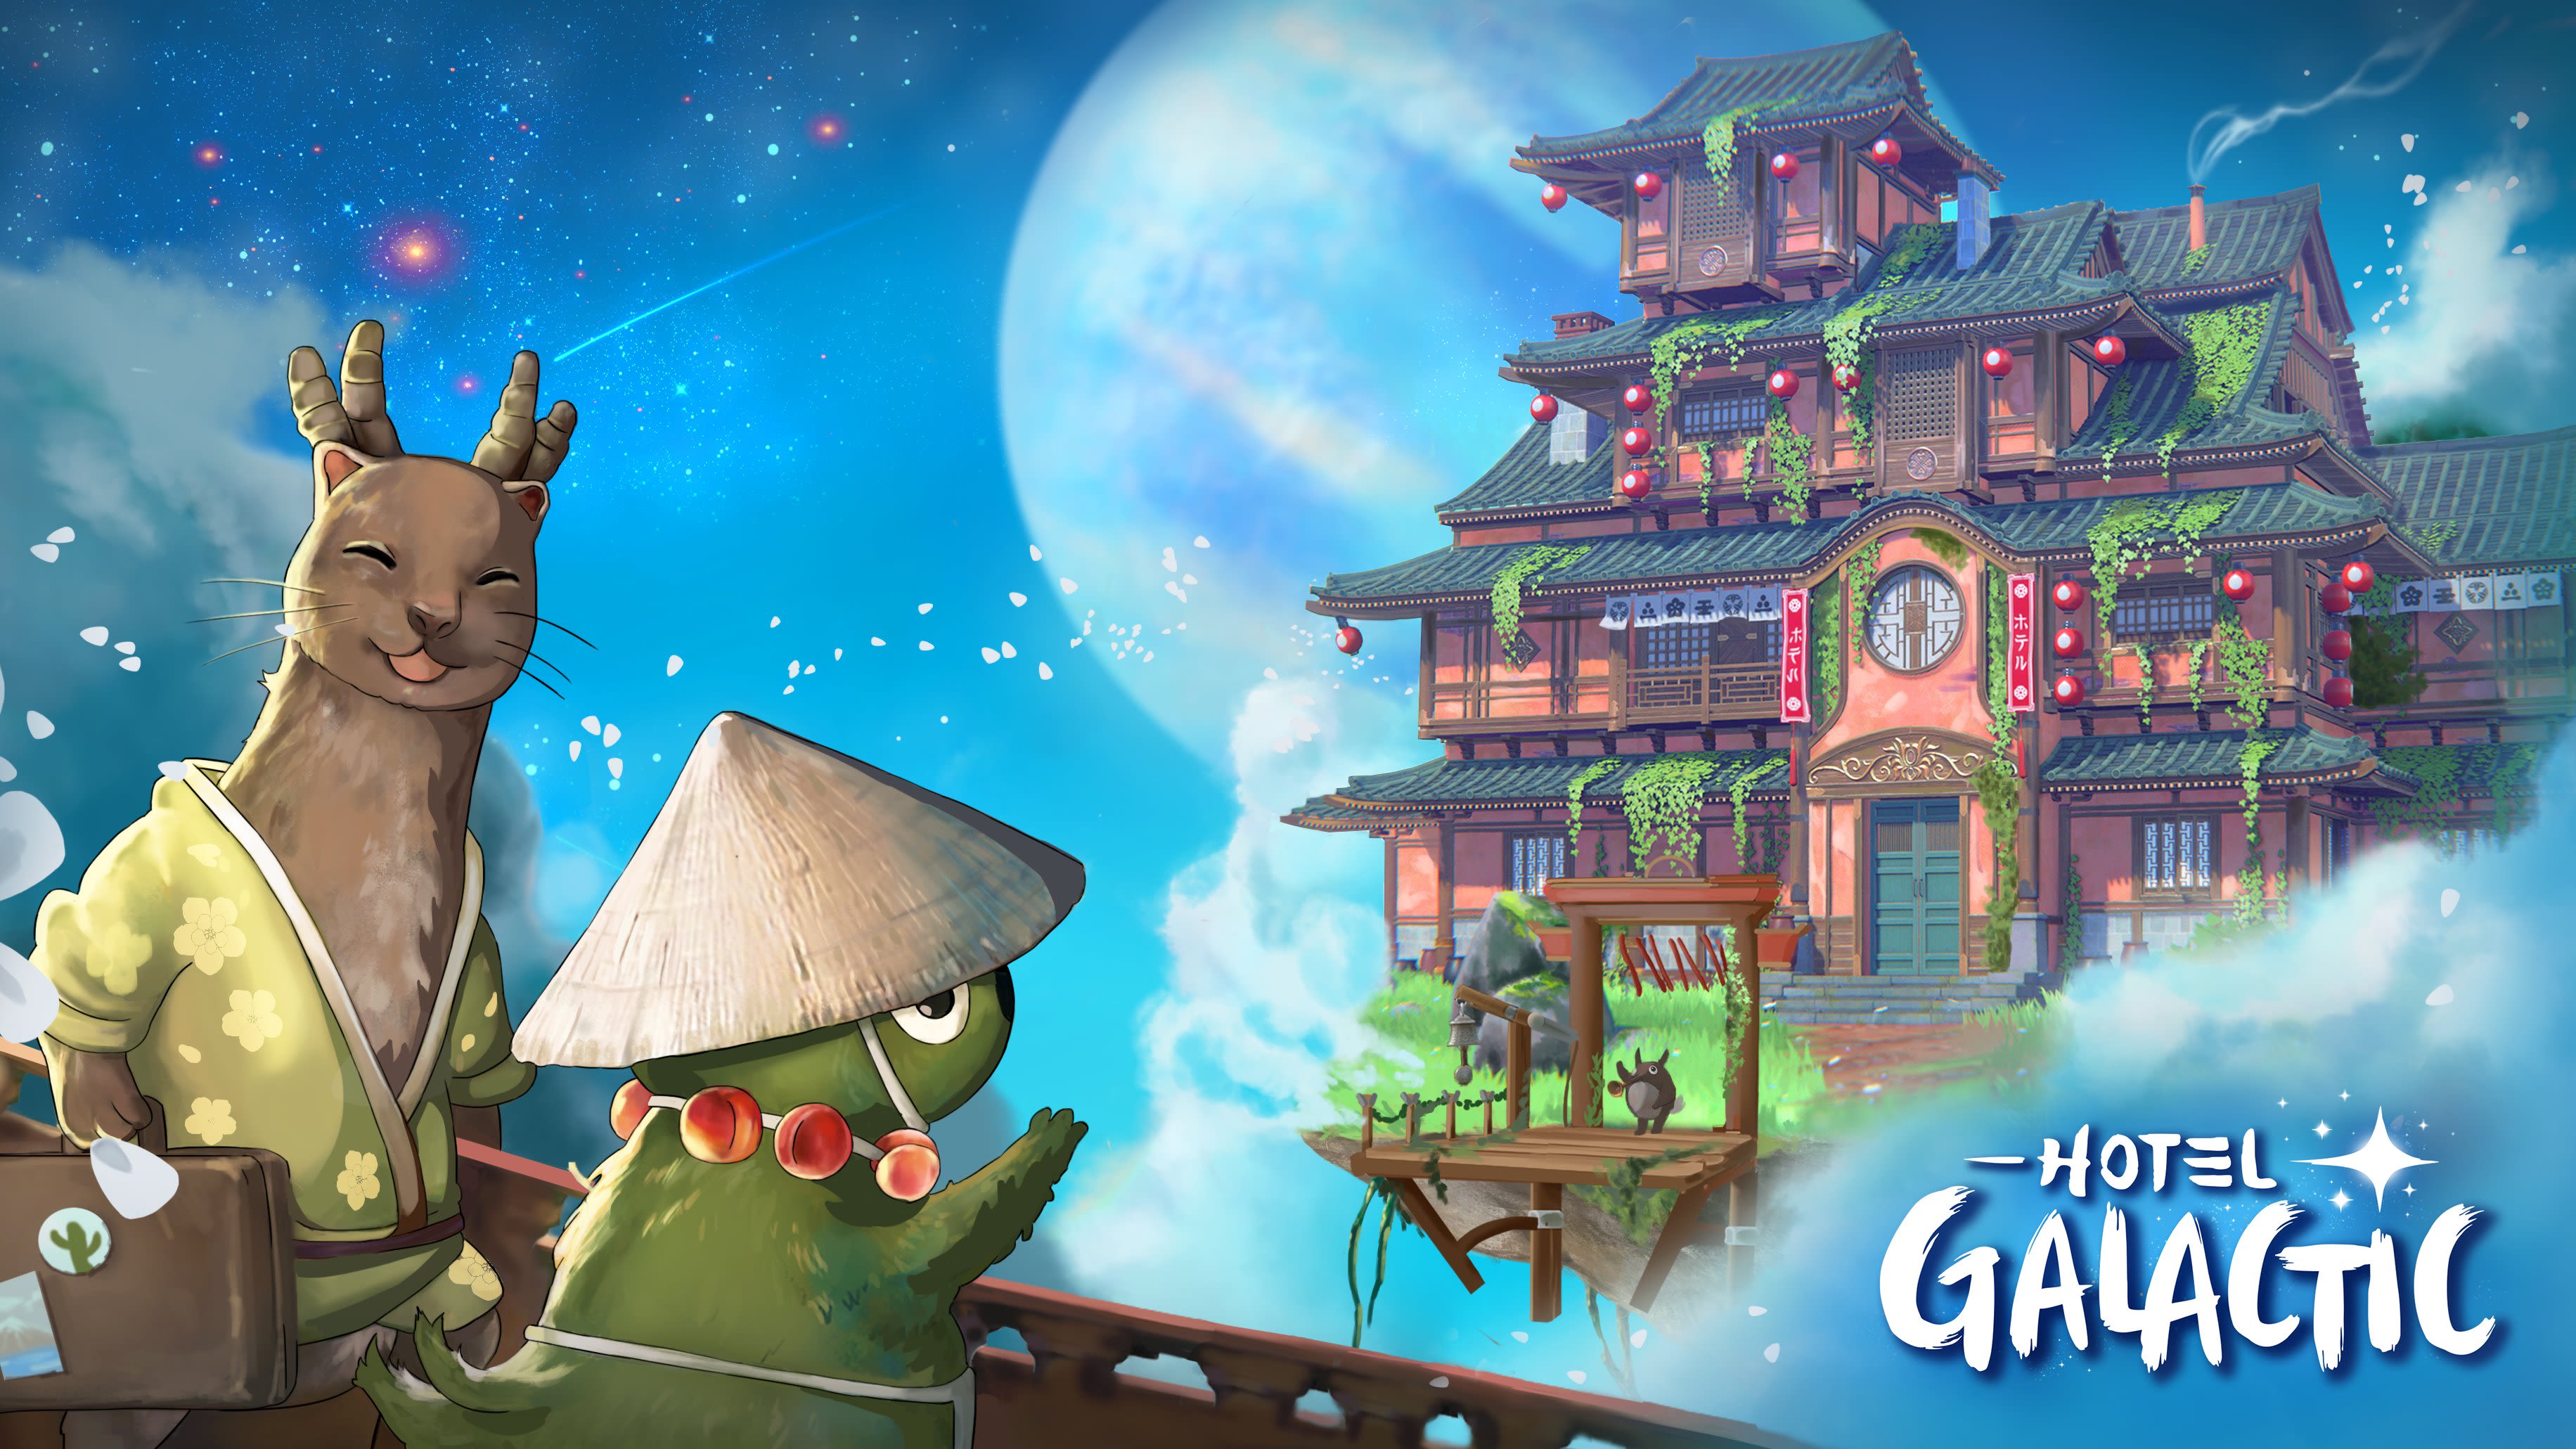 Studio Ghibli-inspired cozy management game Hotel Galactic announced for PlayStation, Xbox, Switch, and PC